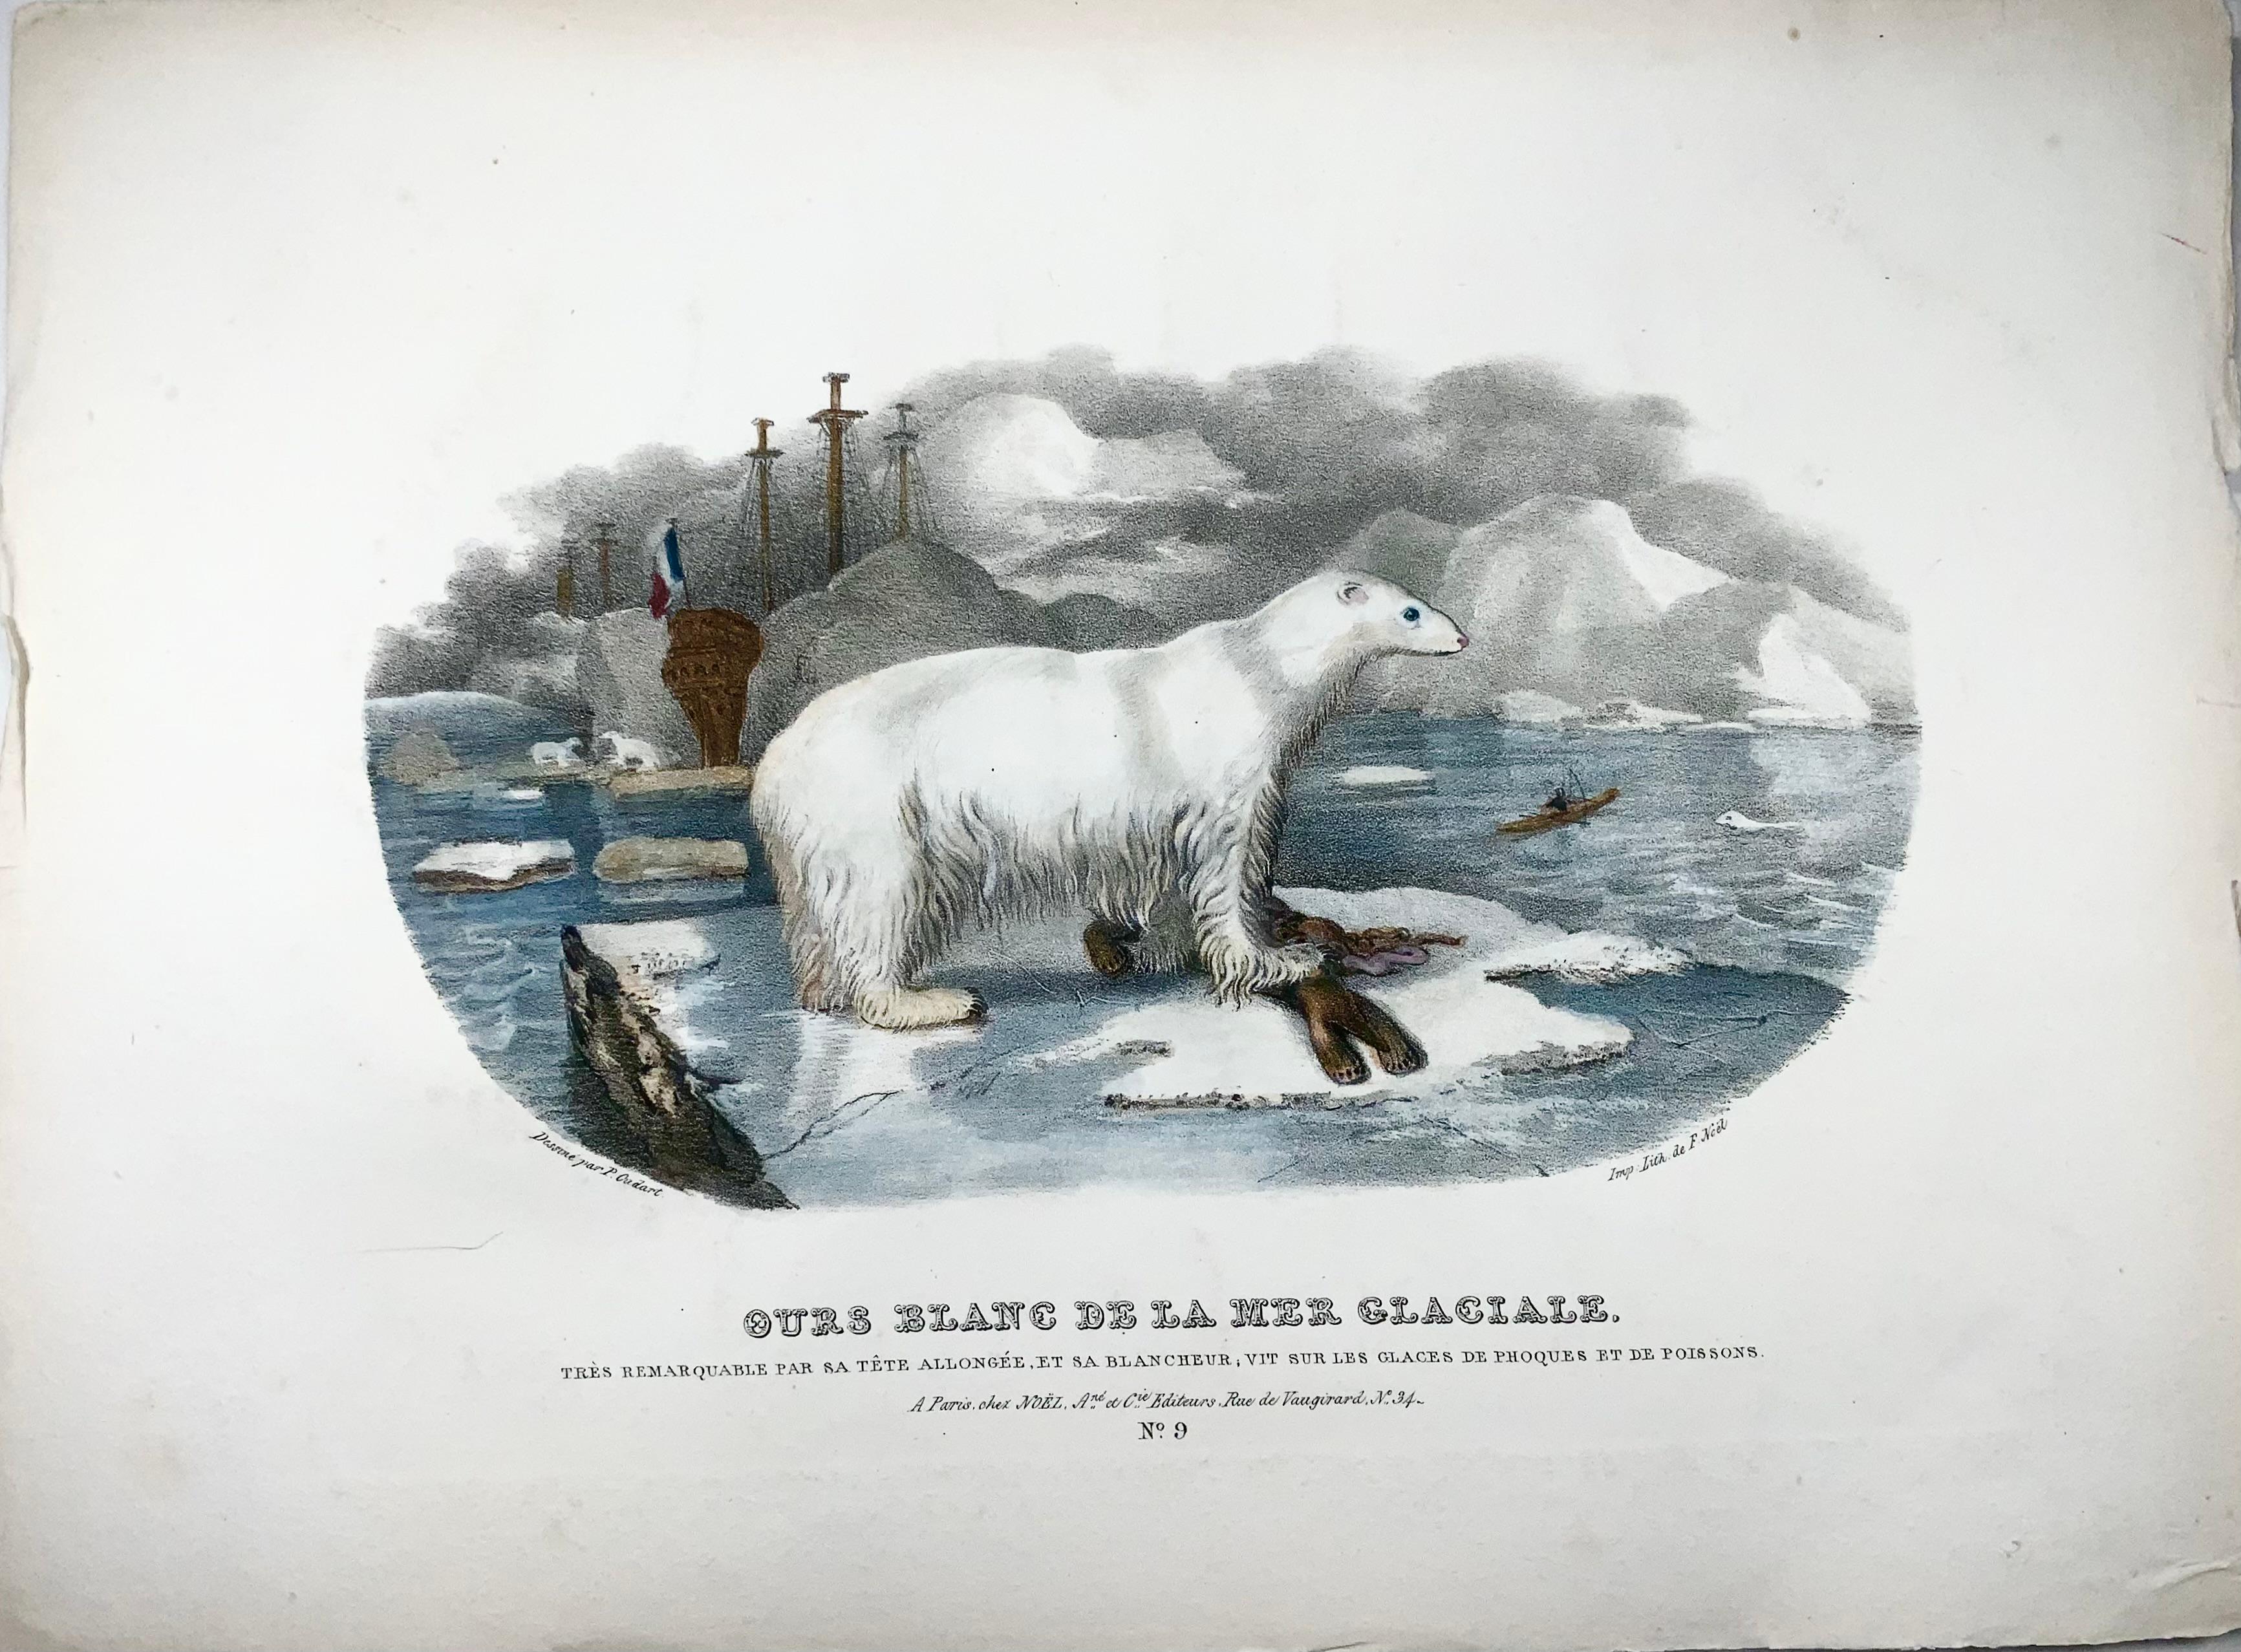 Our Blanc de la Mer Glaciale 

Tres remarquable par sa tete allongee, et sa blancher…. 

Dimensions: Height: 10.83 in (27.5 cm) Width: 14.57 in (37 cm)

Extremely rare.  

Issued in the series:  

Histoire naturelle. Ensemble de 41